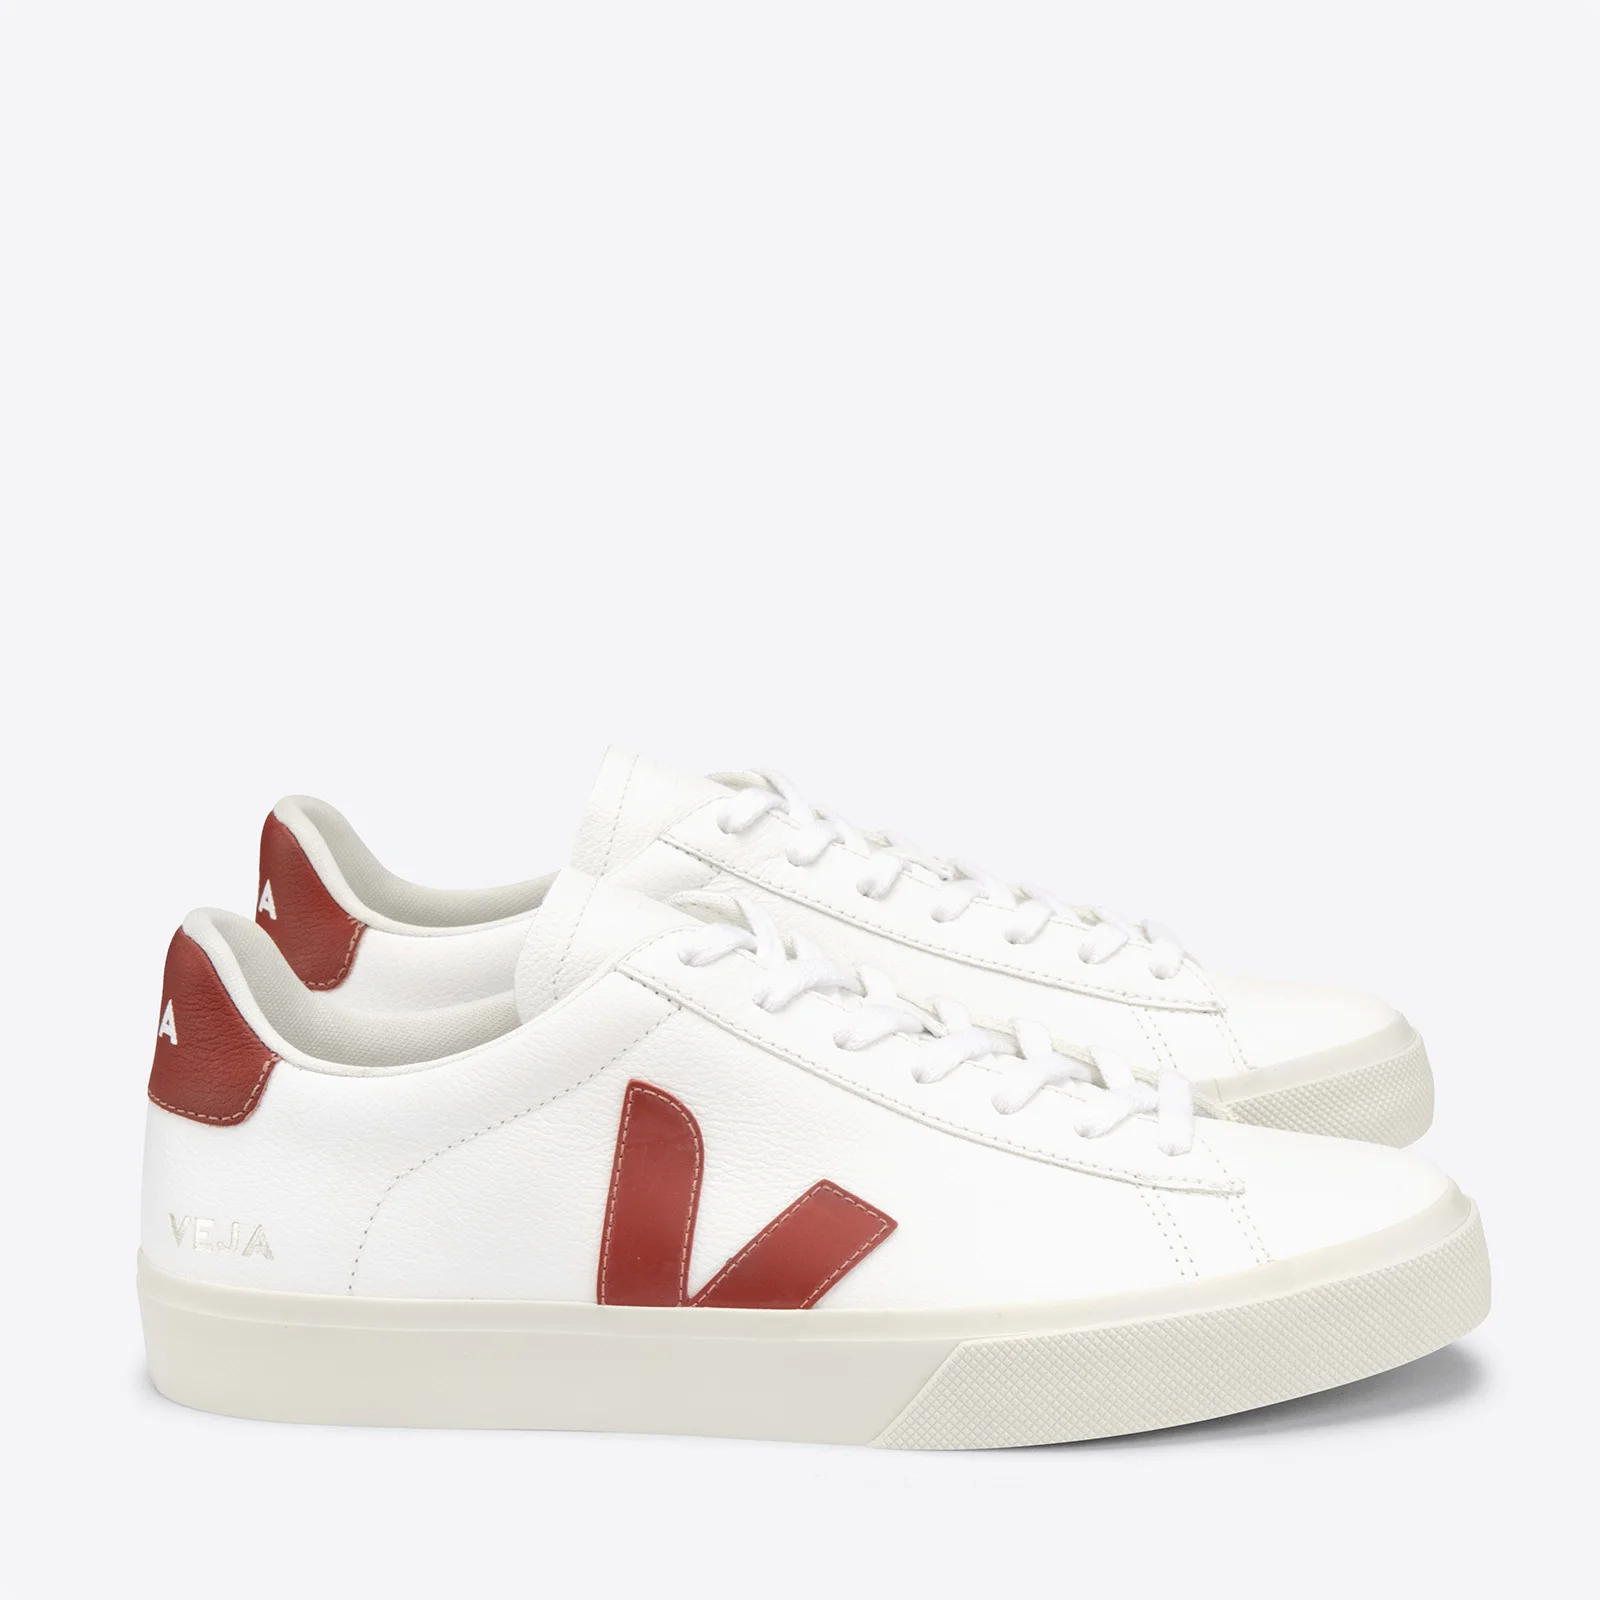 Veja Men's Campo Chrome Free Leather Trainers - Extra White/Rouille Image 1